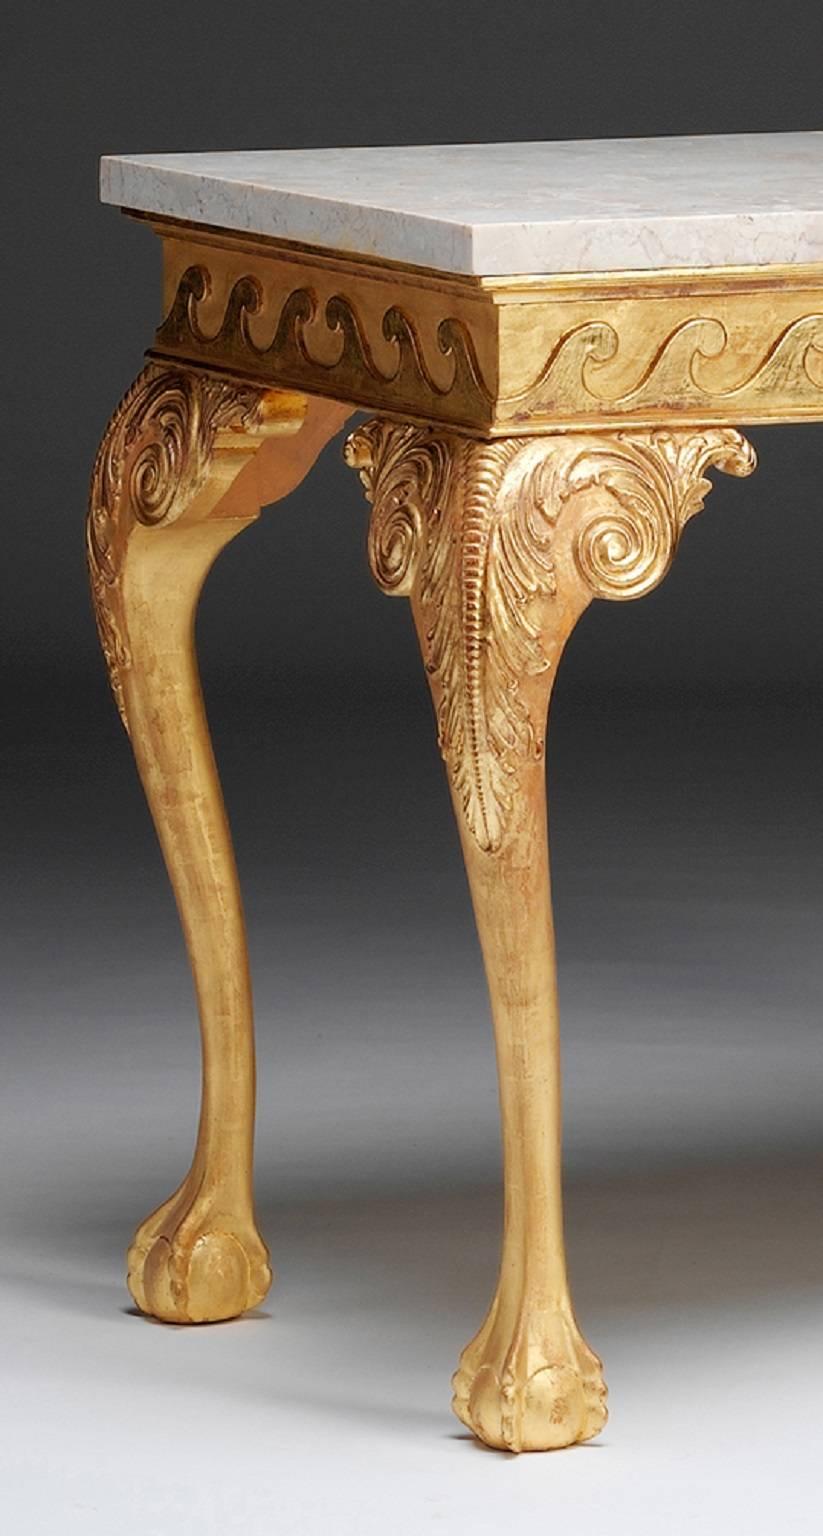 A carved giltwood side table in the George II tradition. The rectangular marble top sits above a Vitruvian scrolled frieze raised on a cabriole legs. The legs are carved with acanthus leaf capped knees and with scrolled and leaf carved ear brackets